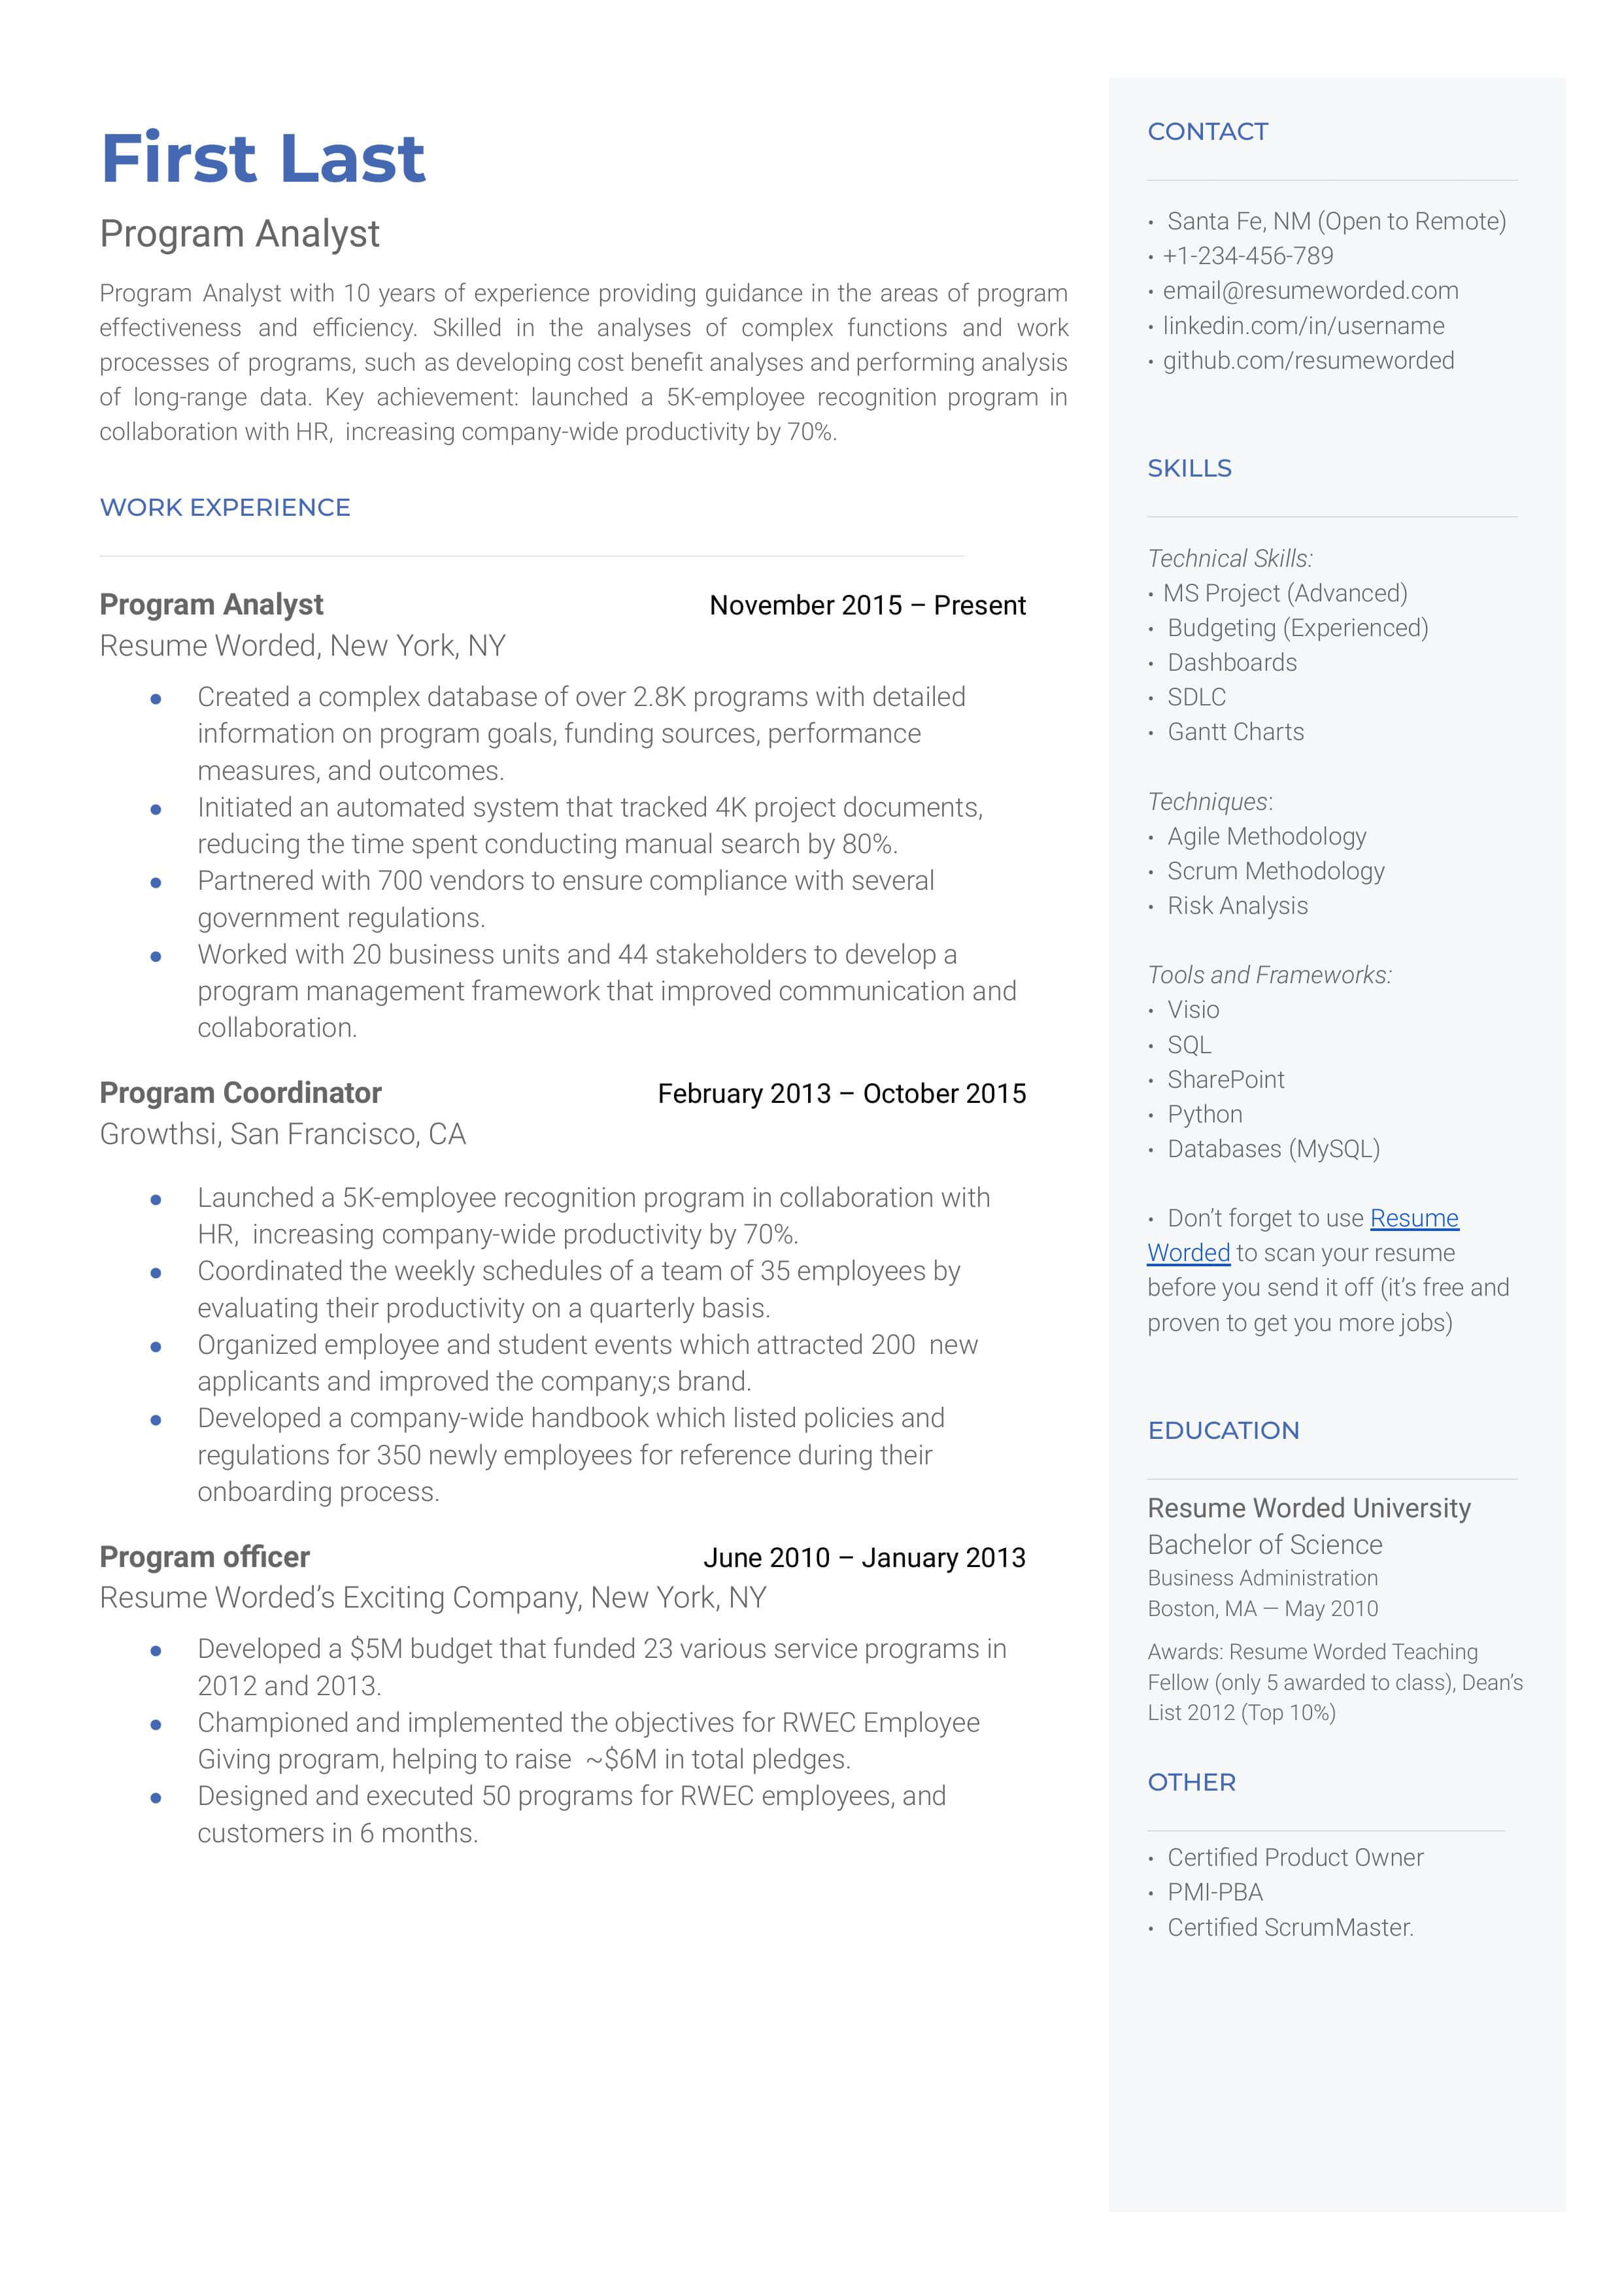 A program analyst resume template that highlights skills and work experience